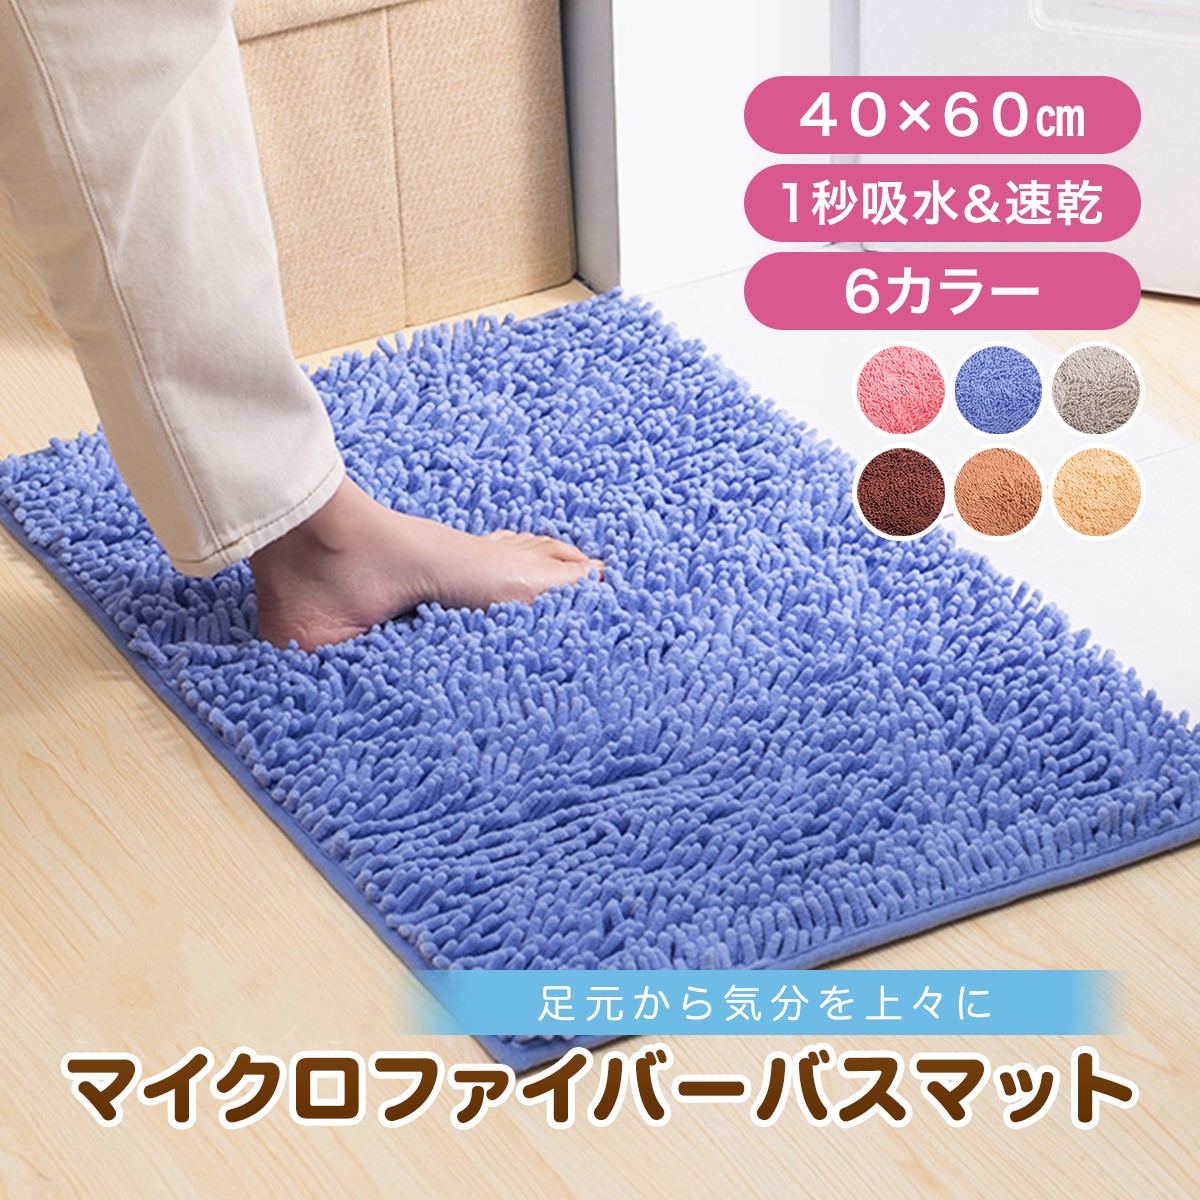  bath mat speed . large size 40×60cm microfibre stylish laundry is possible towel ground suction 